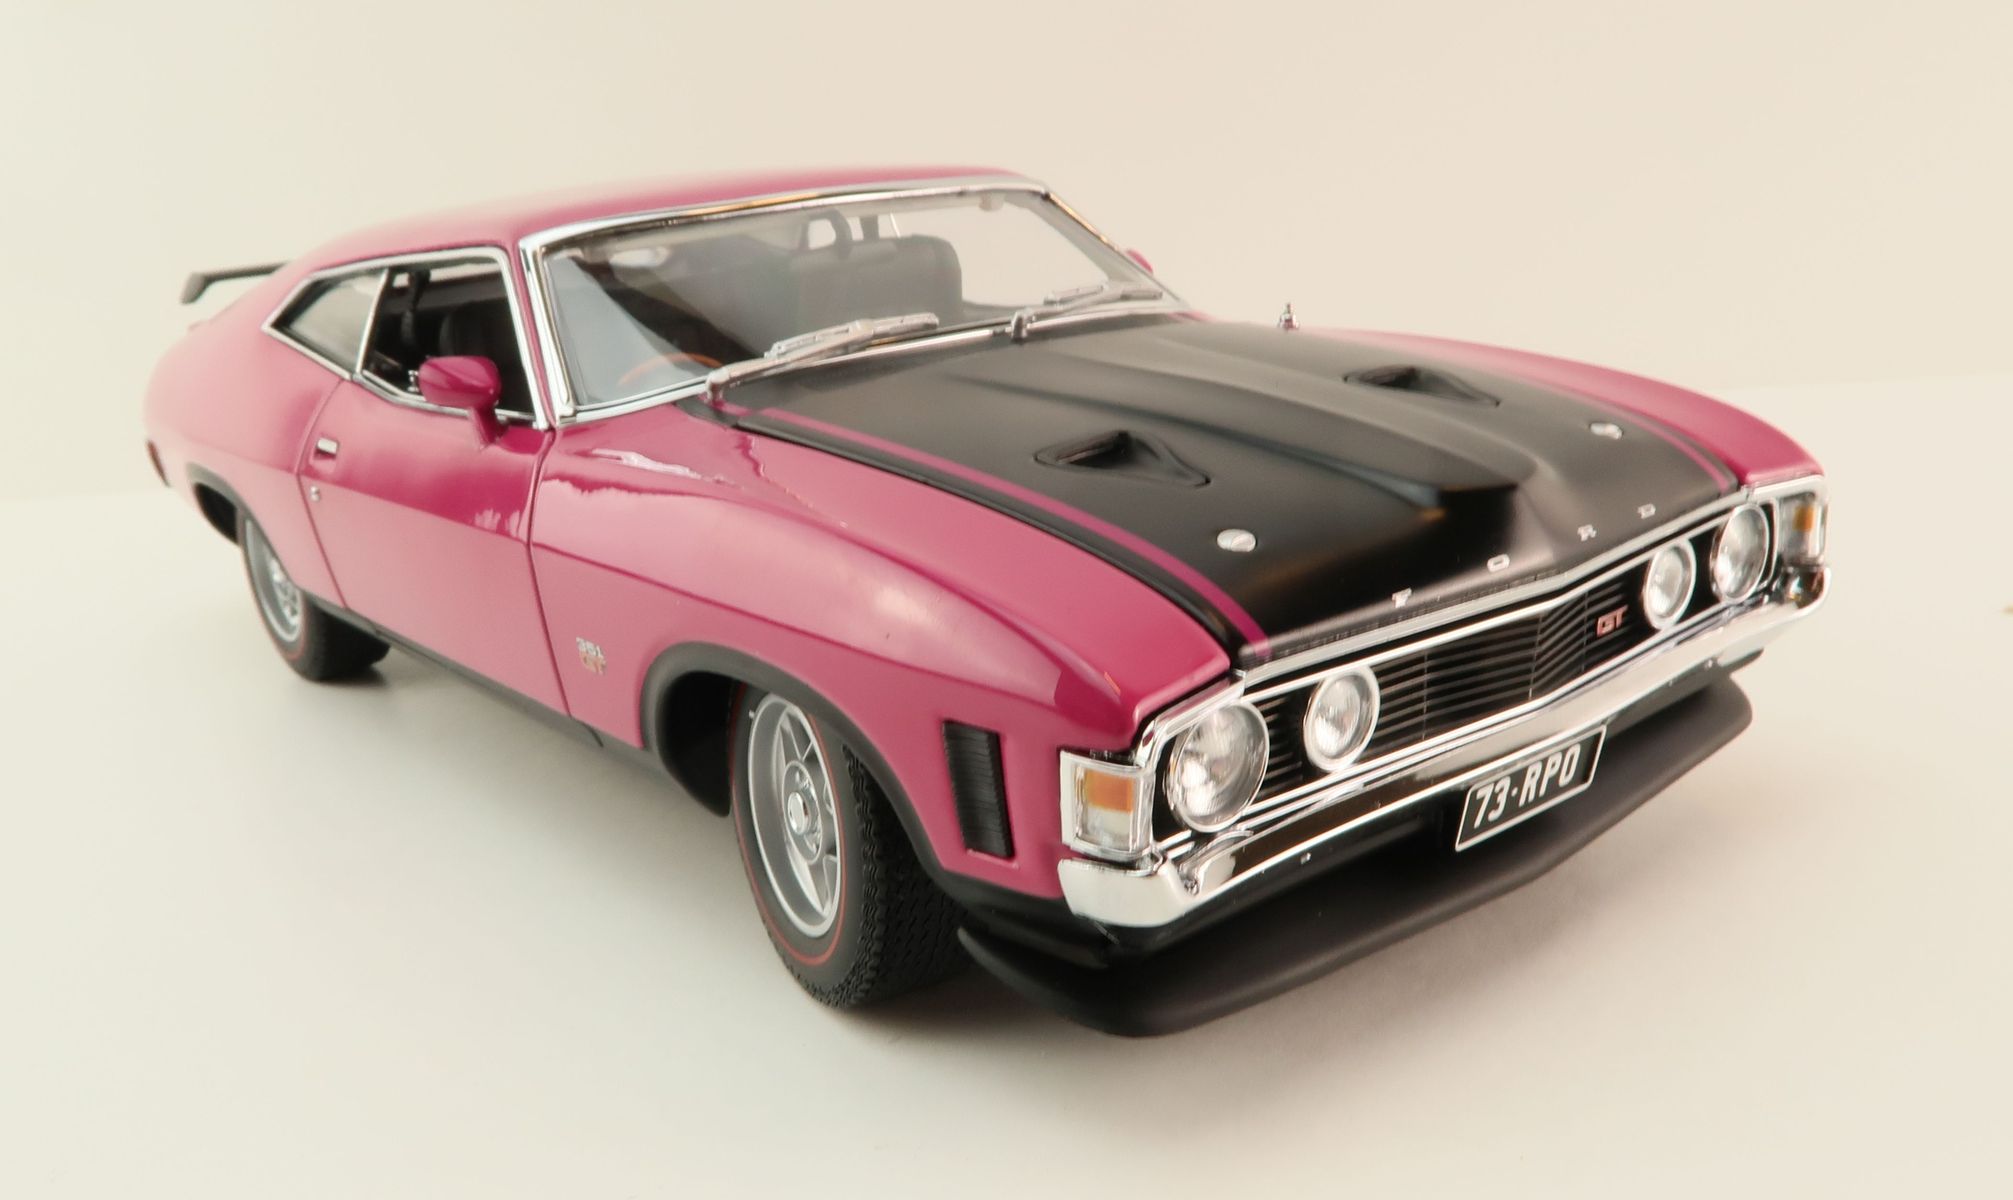 Product Image - Classic Carlectables 18798 Ford XA Falcon RPO83 Coupe Wild Plum - Scale 1:18